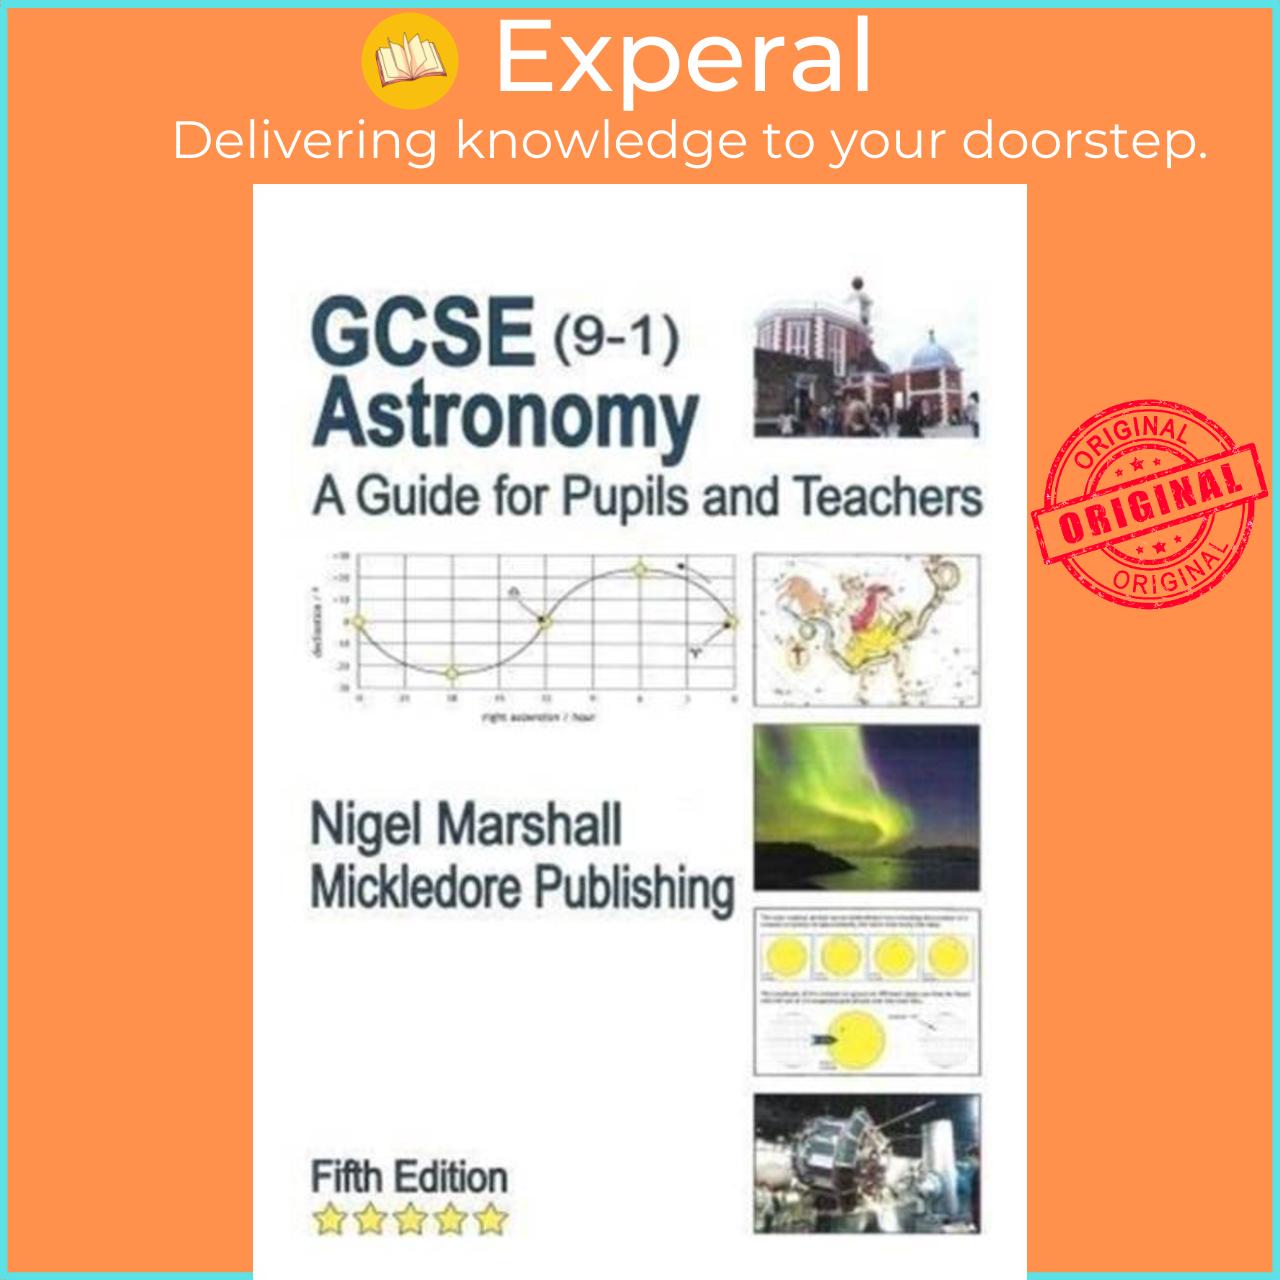 Sách - GCSE (9-1) Astronomy: A Guide for Pupils and Teachers by Nigel Marshall (UK edition, paperback)